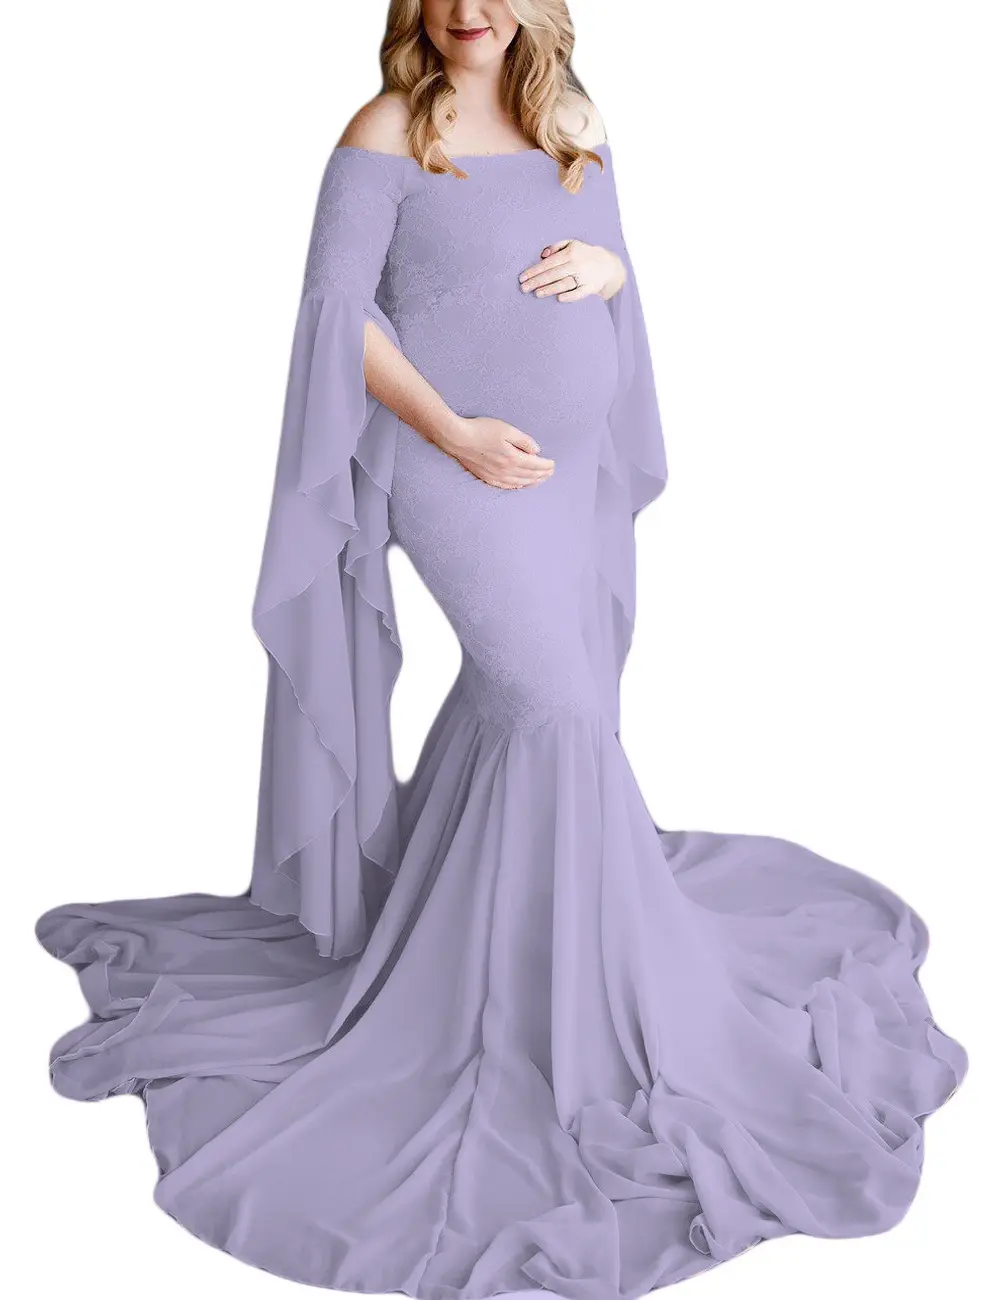 Europe America Pregnant Dress Lace Maternity Dress For Photoshoot